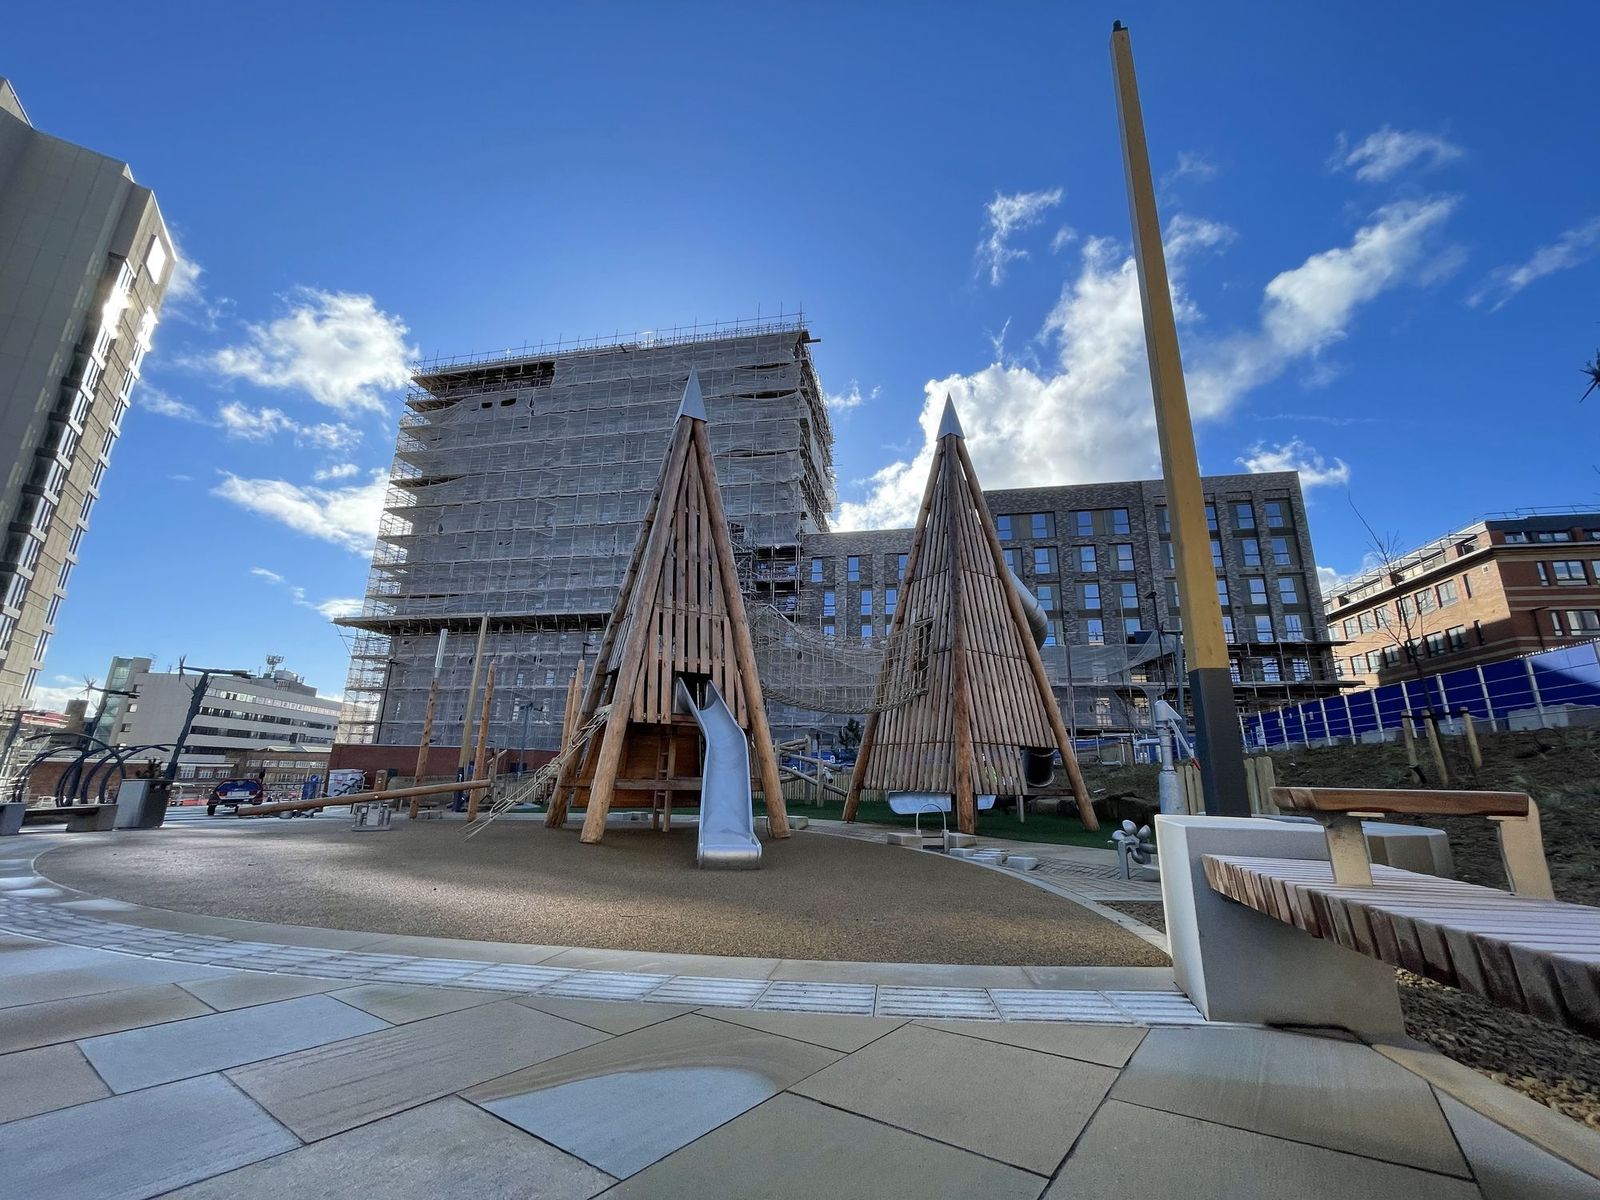 Sheffield’s new city centre park set to open this Easter